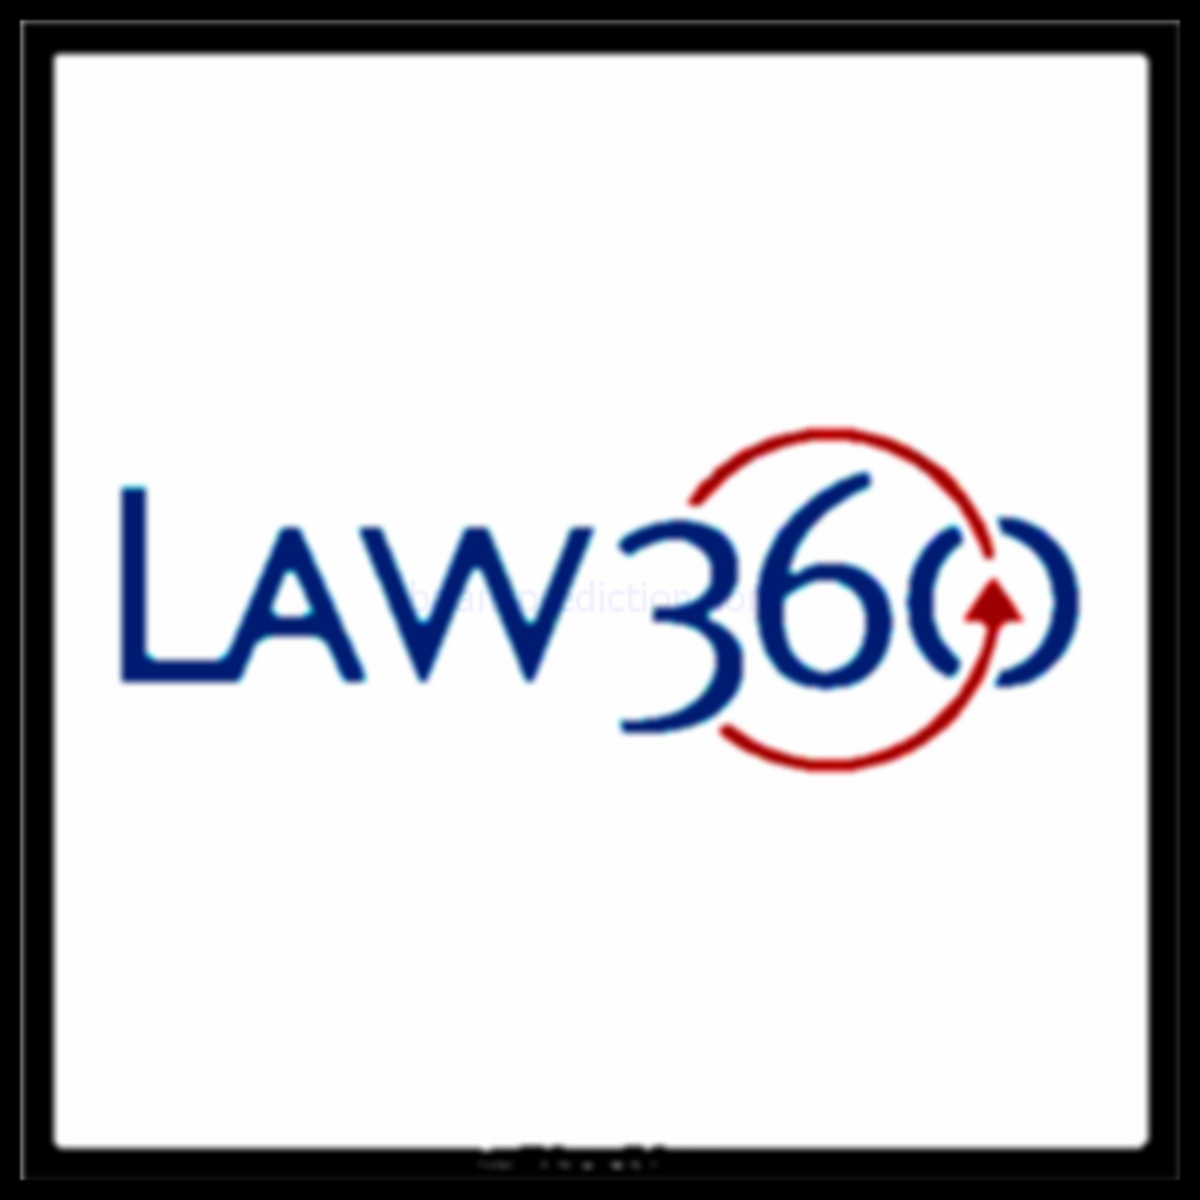 Law360-google-1024 Matthew George Whitaker and World Patent Marketing Inc secrets you have got to see before they are pulled from the web Law360-google-1024    psychic Brian Ladd
Law360-google-1024 Matthew George Whitaker and World Patent Marketing Inc secrets you have got to see before they are pulled from the web Law360-google-1024    psychic Brian Ladd
